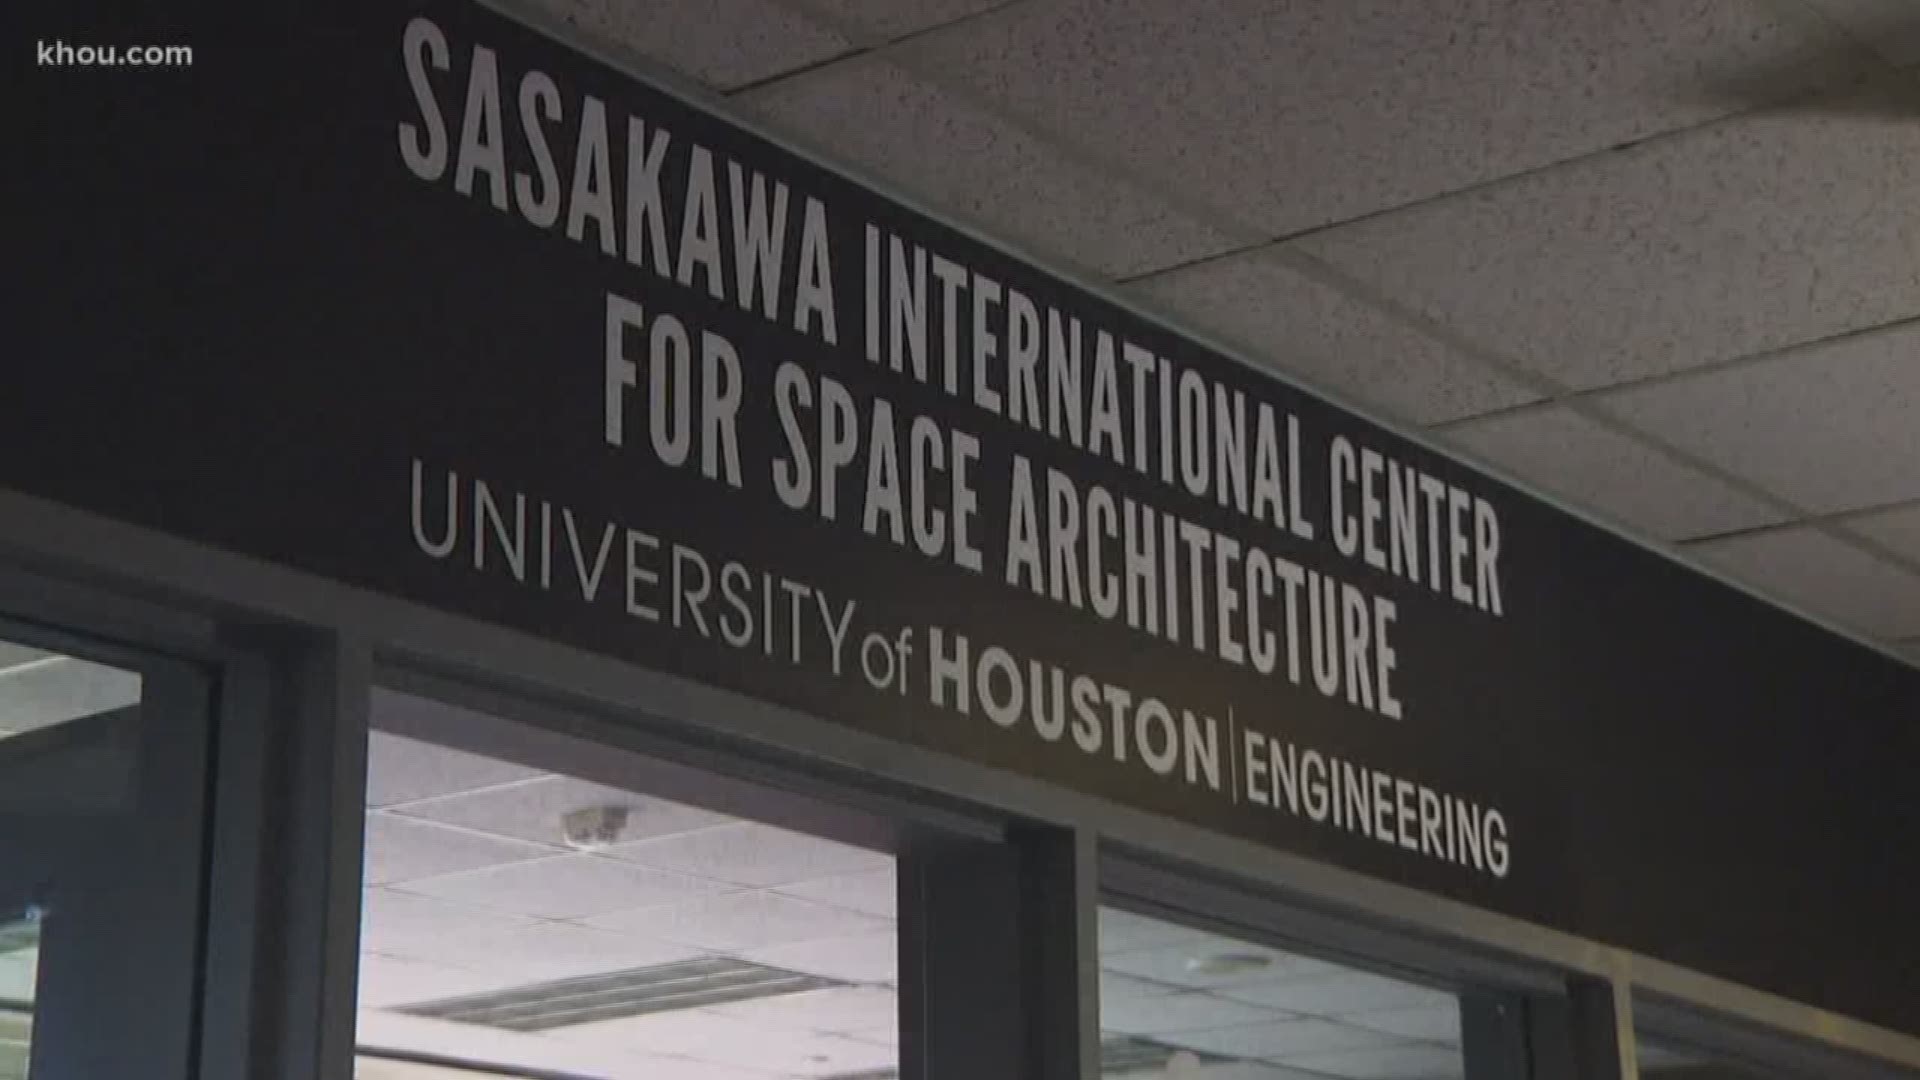 KHOU 11 reporter Josh Marshall takes a look inside the University of Houston's space architecture program known as SICSA.